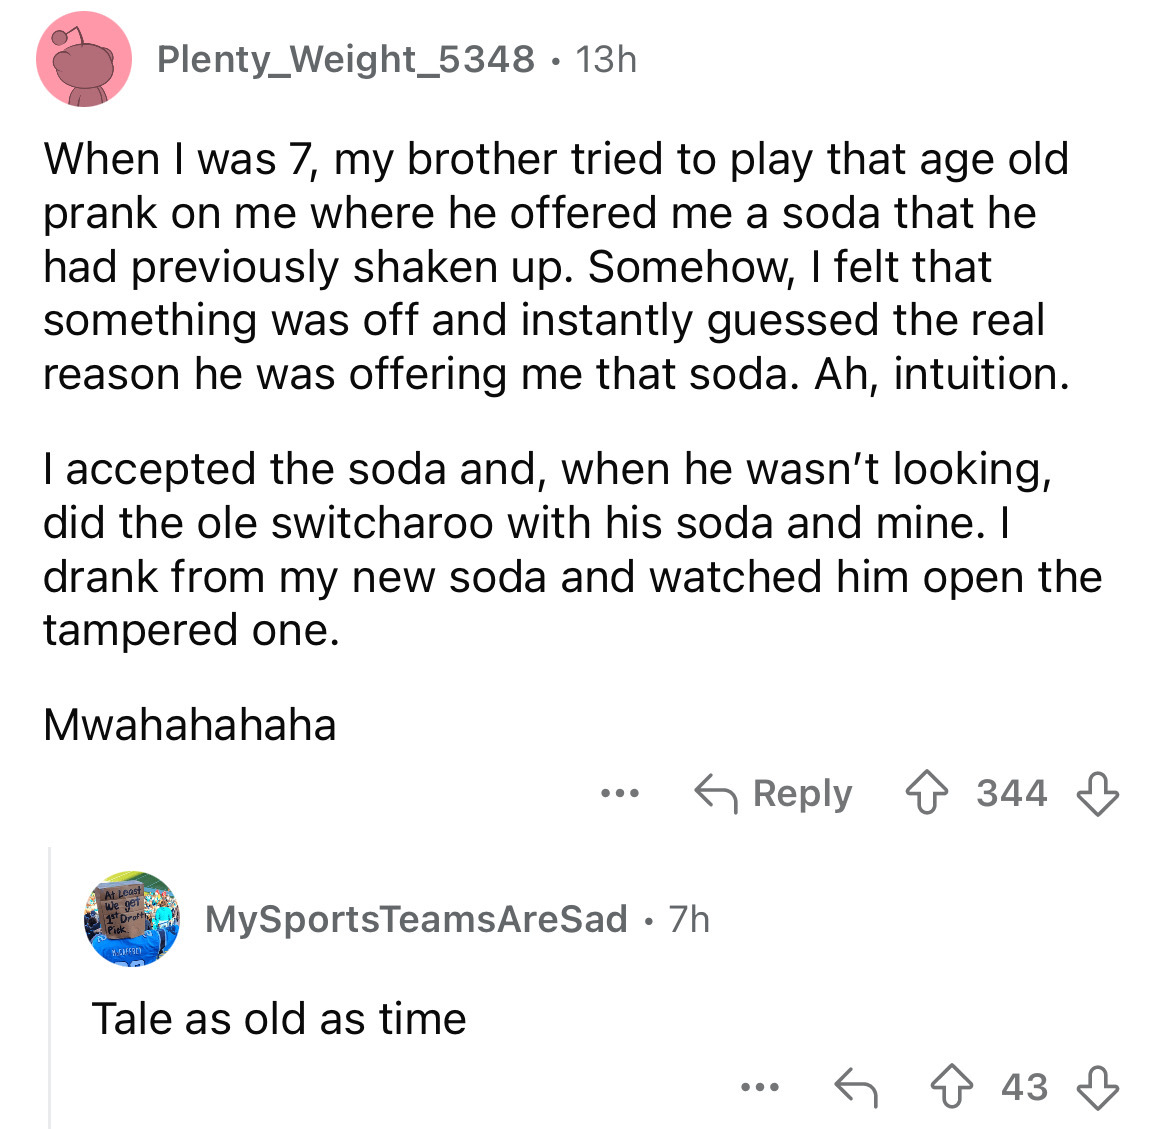 screenshot - Plenty_Weight_5348 13h . When I was 7, my brother tried to play that age old prank on me where he offered me a soda that he had previously shaken up. Somehow, I felt that something was off and instantly guessed the real reason he was offering